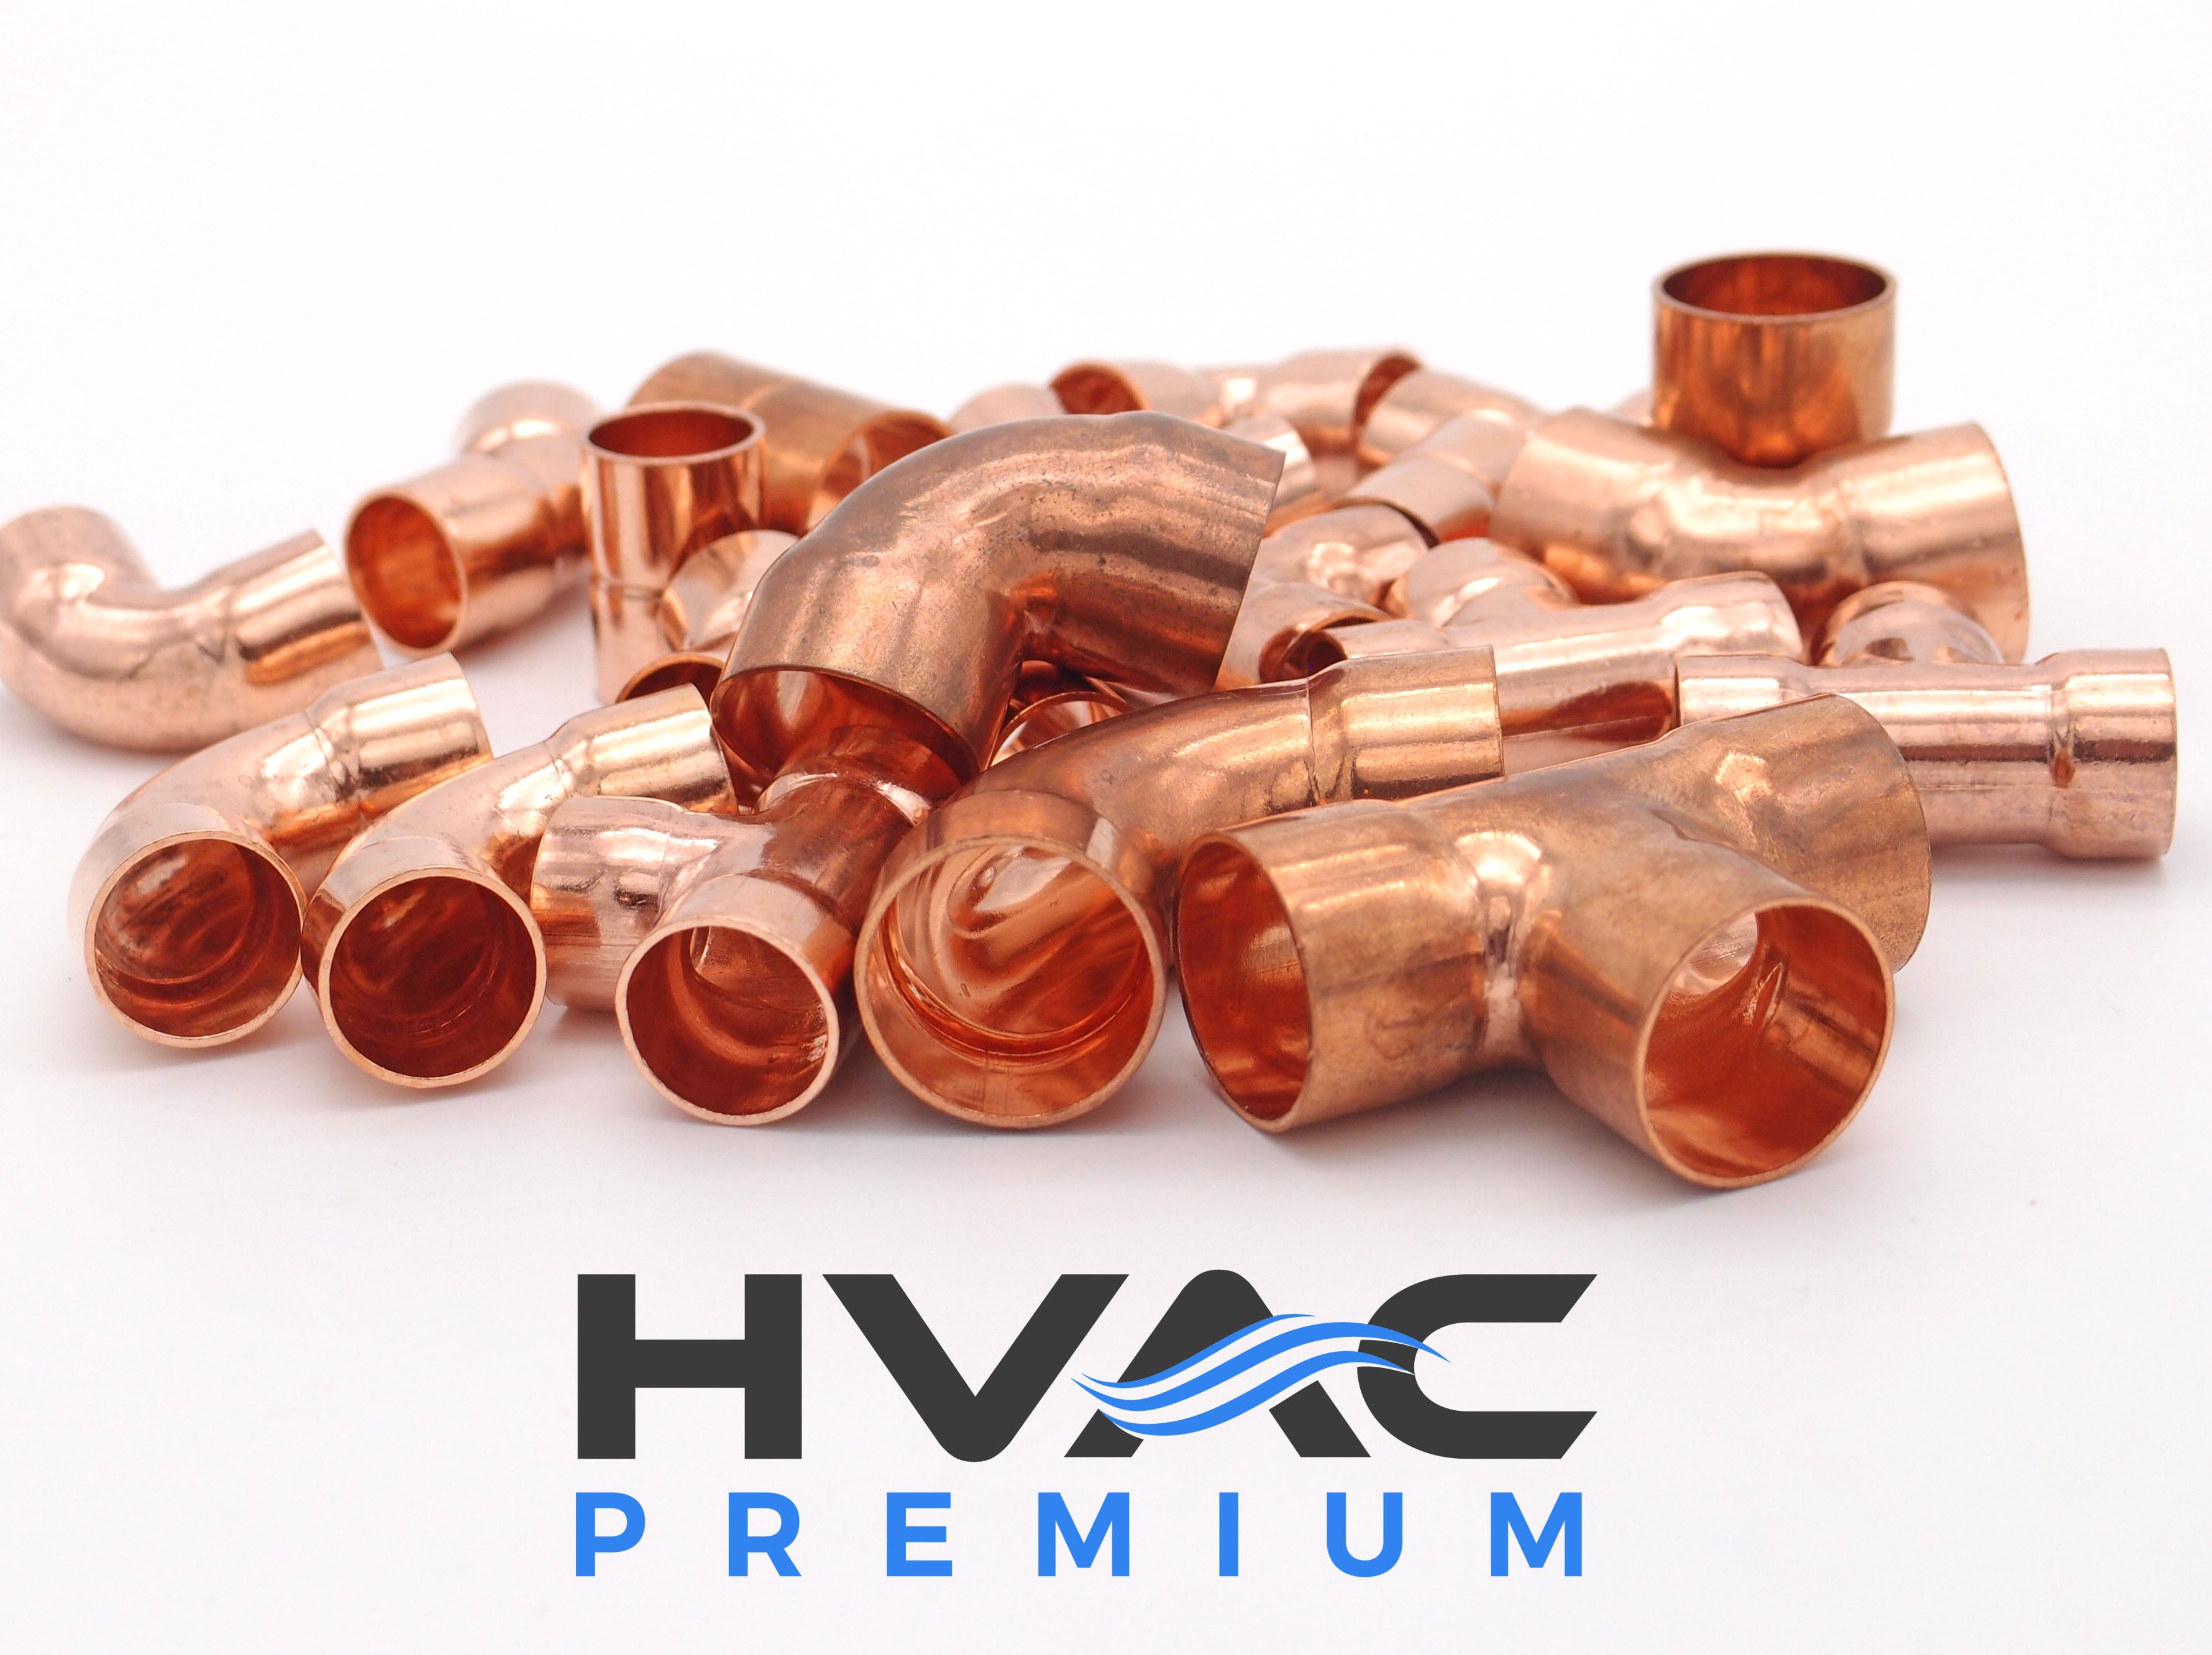 Copper Fitting 1/2 Inch (HVAC Outer Dimension) 3/8 Inch (Plumbing Inner Dimension) - Straight Copper Coupling Fittings With Rolled Tube Stop & HVAC – 99.9% Pure Copper - 5 Pack